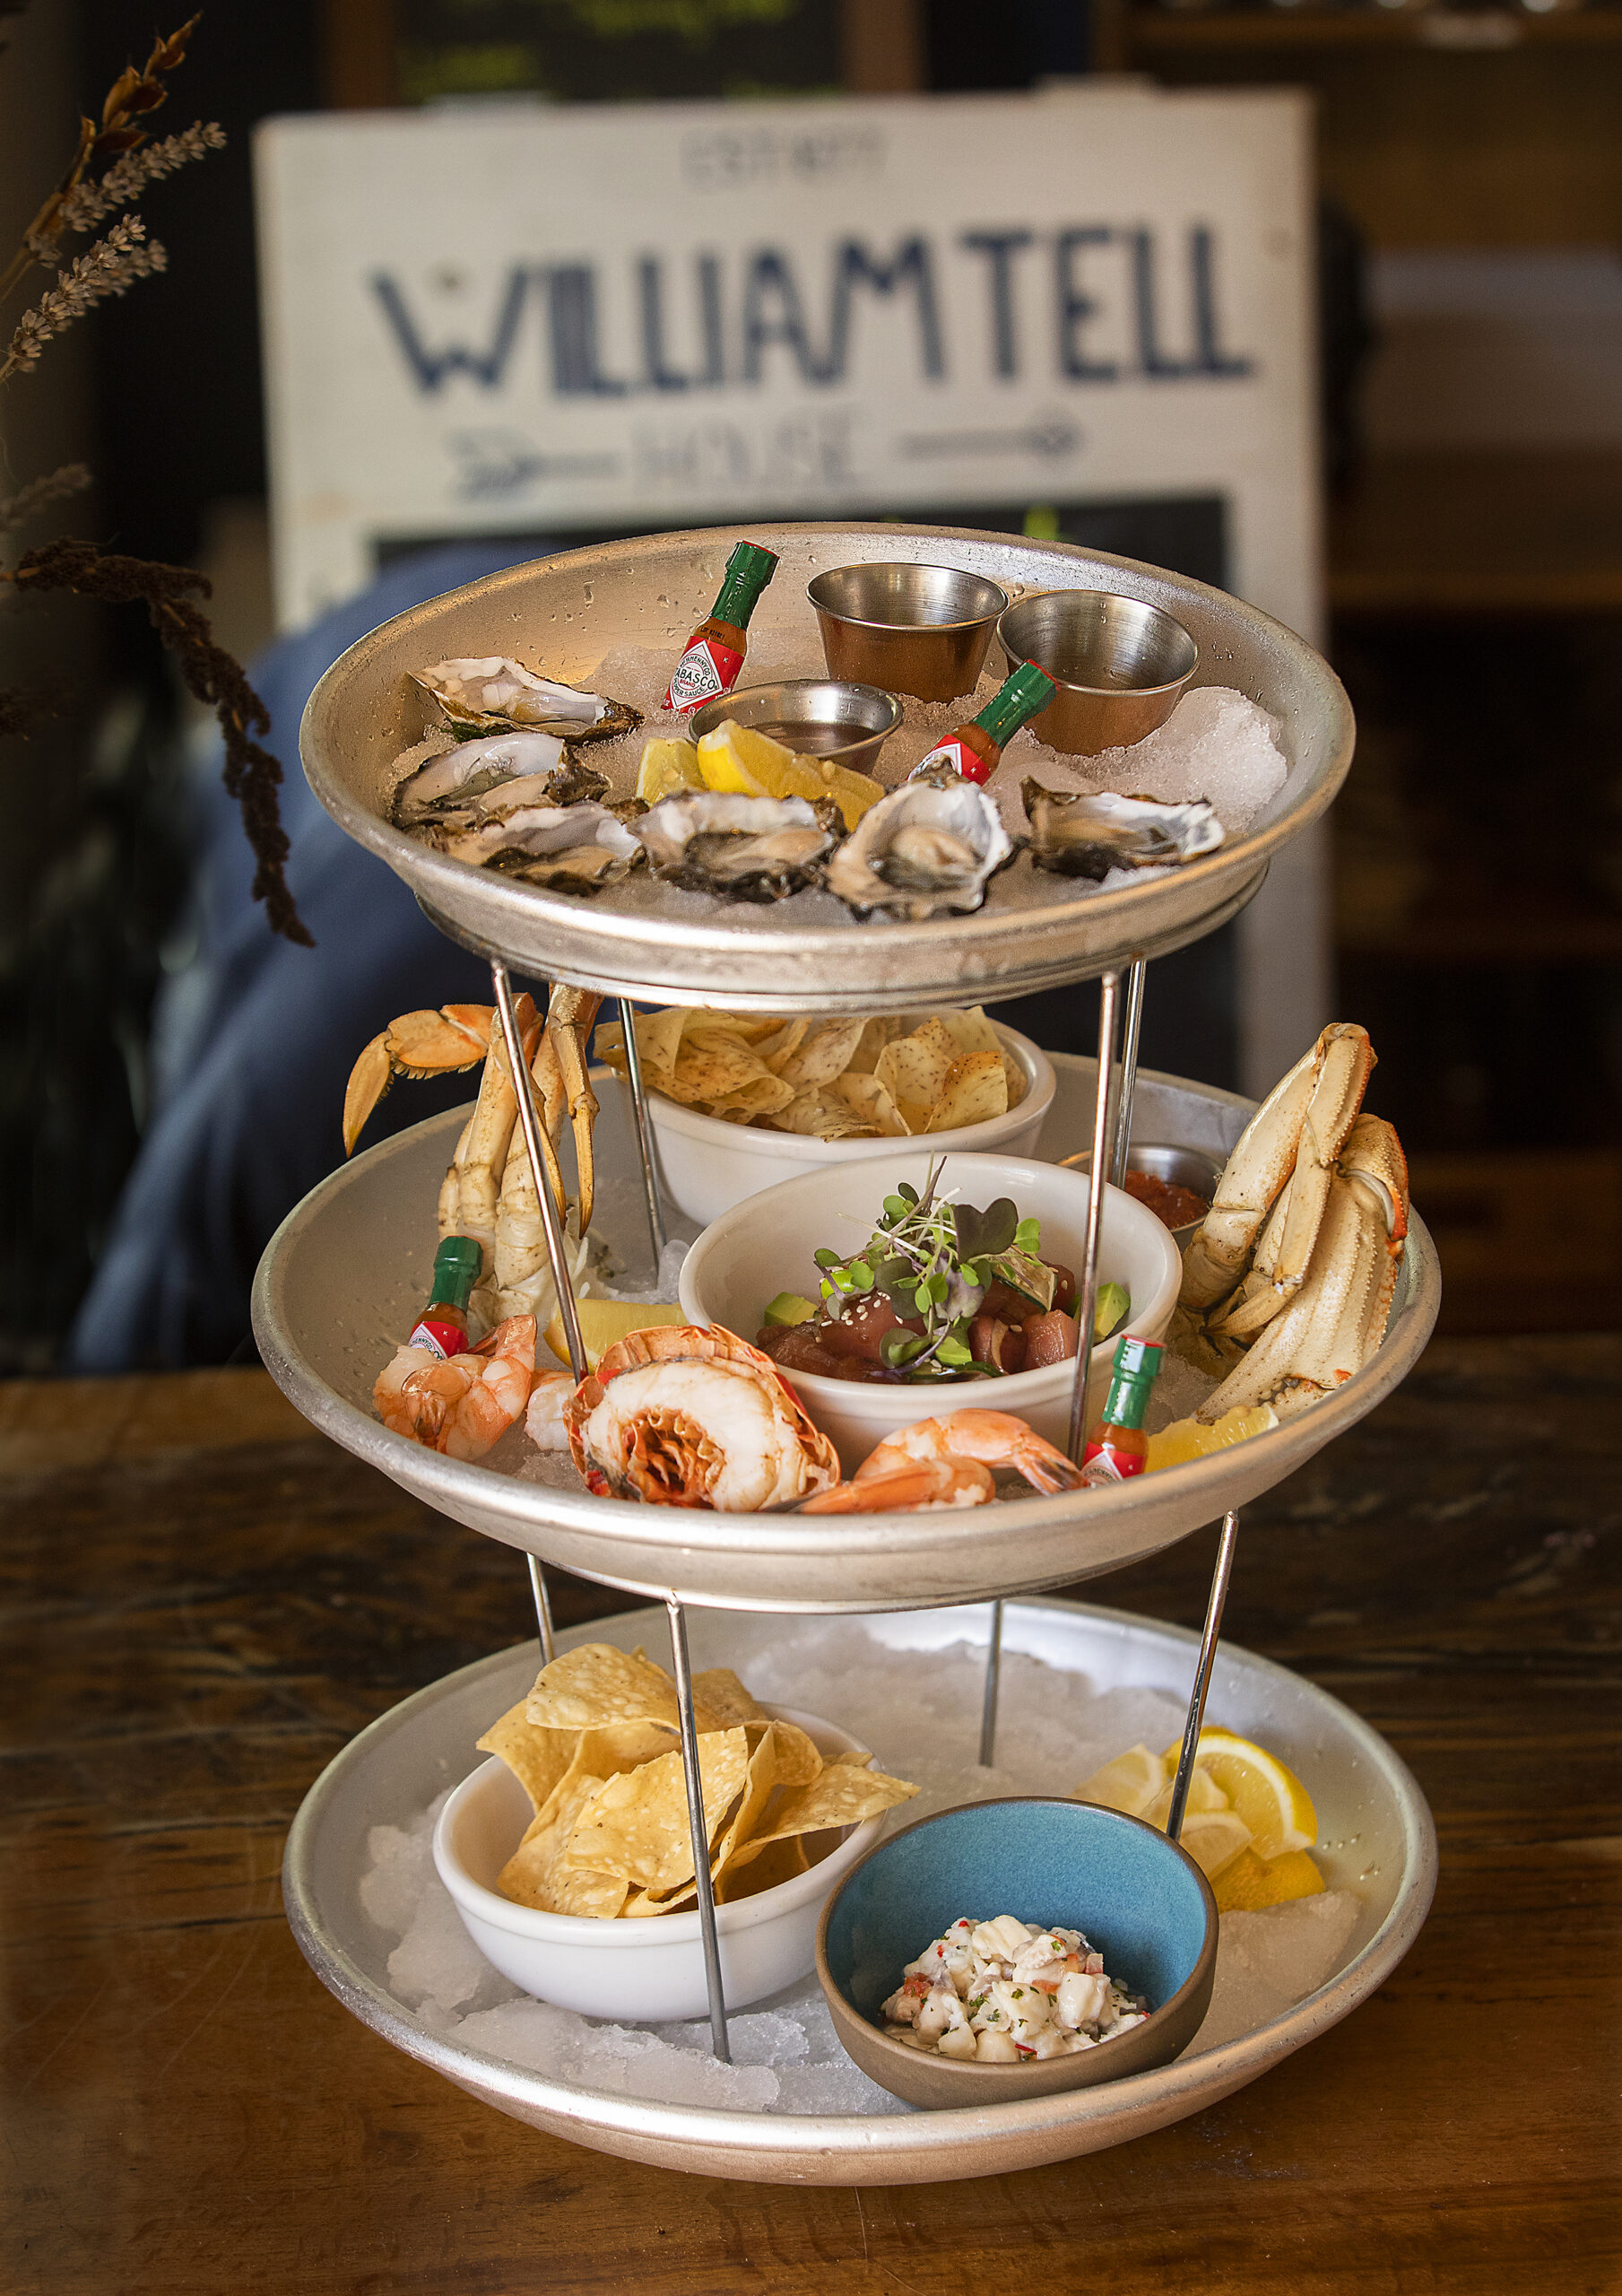 The Tell Seafood Tower with oysters, crab, ceviche and clams from the William Tell House in Tomales on Sunday, May 29, 2021. (Photo by John Burgess/The Press Democrat)